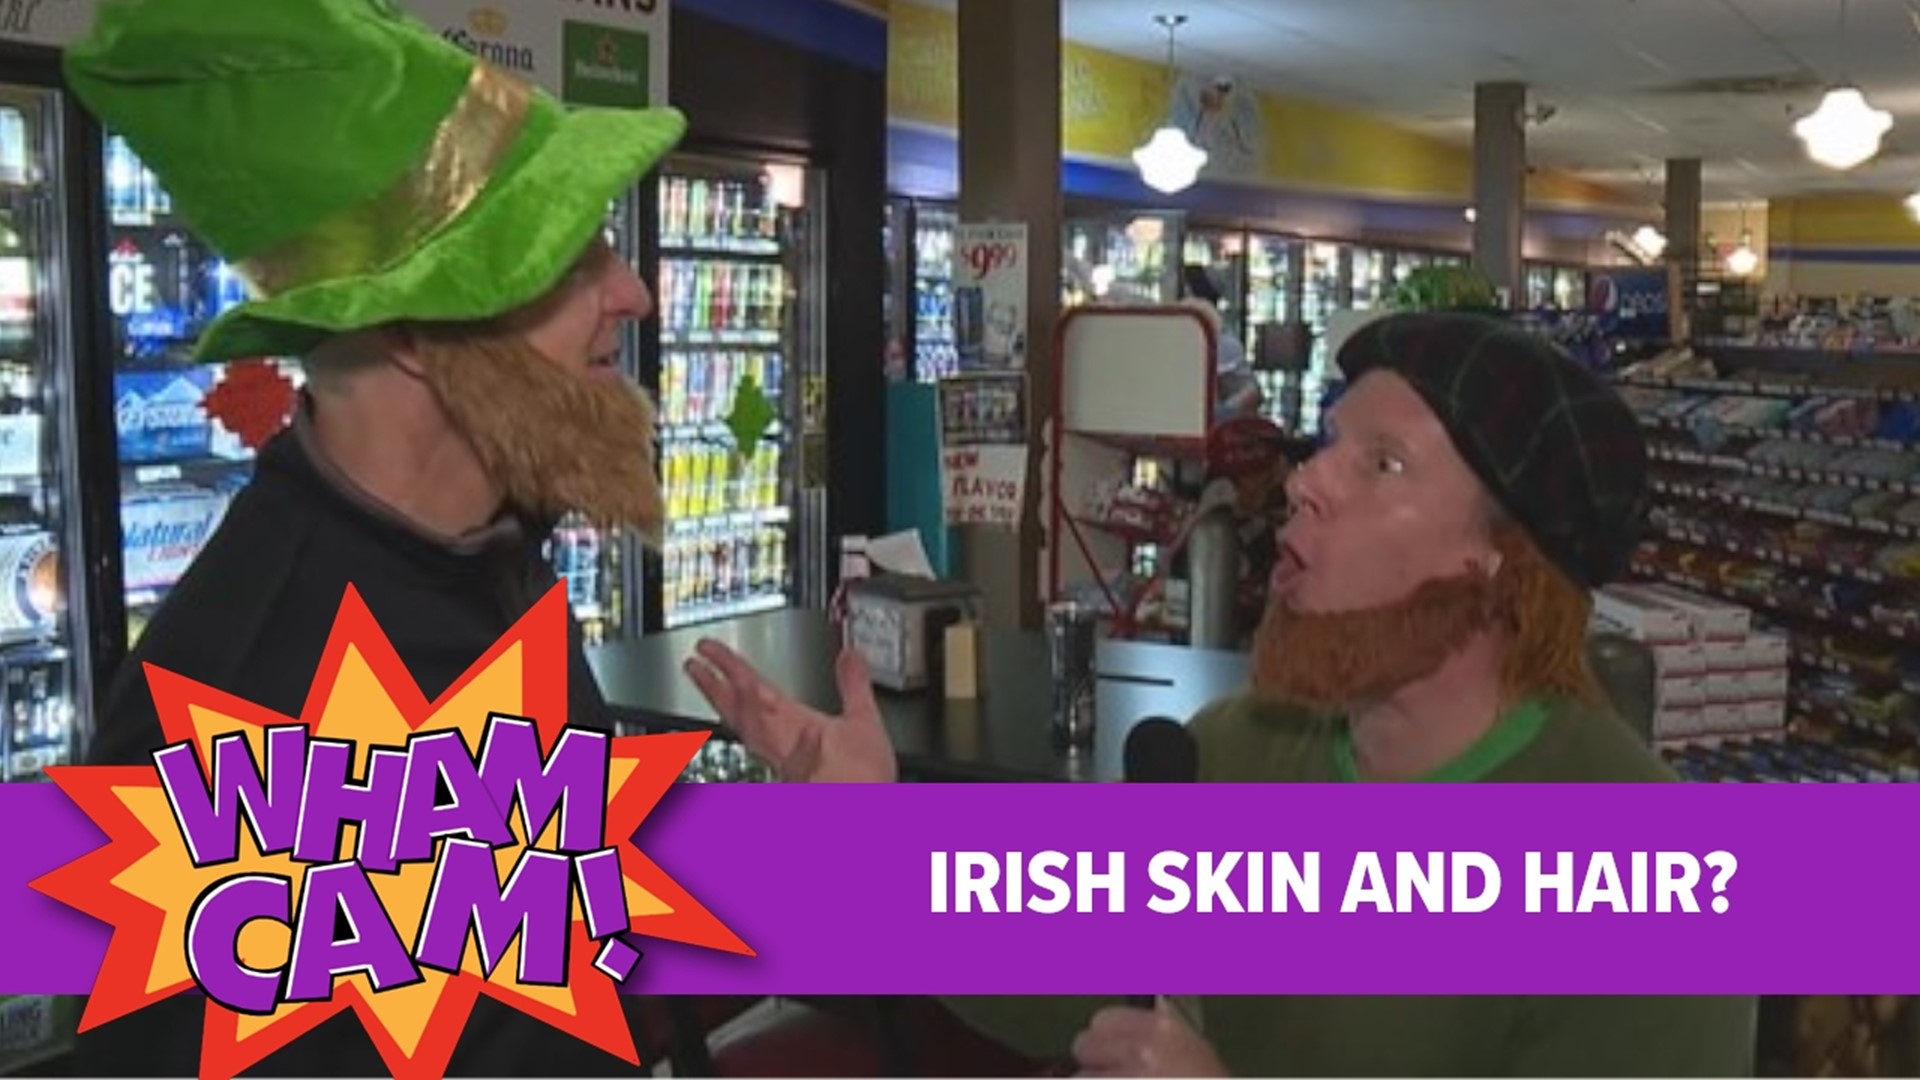 It's not cliche, but it's a fact that many Irish people have red hair and light skin. So, just in time for St. Patrick's Day, Joe and Jose see if anyone knows why.